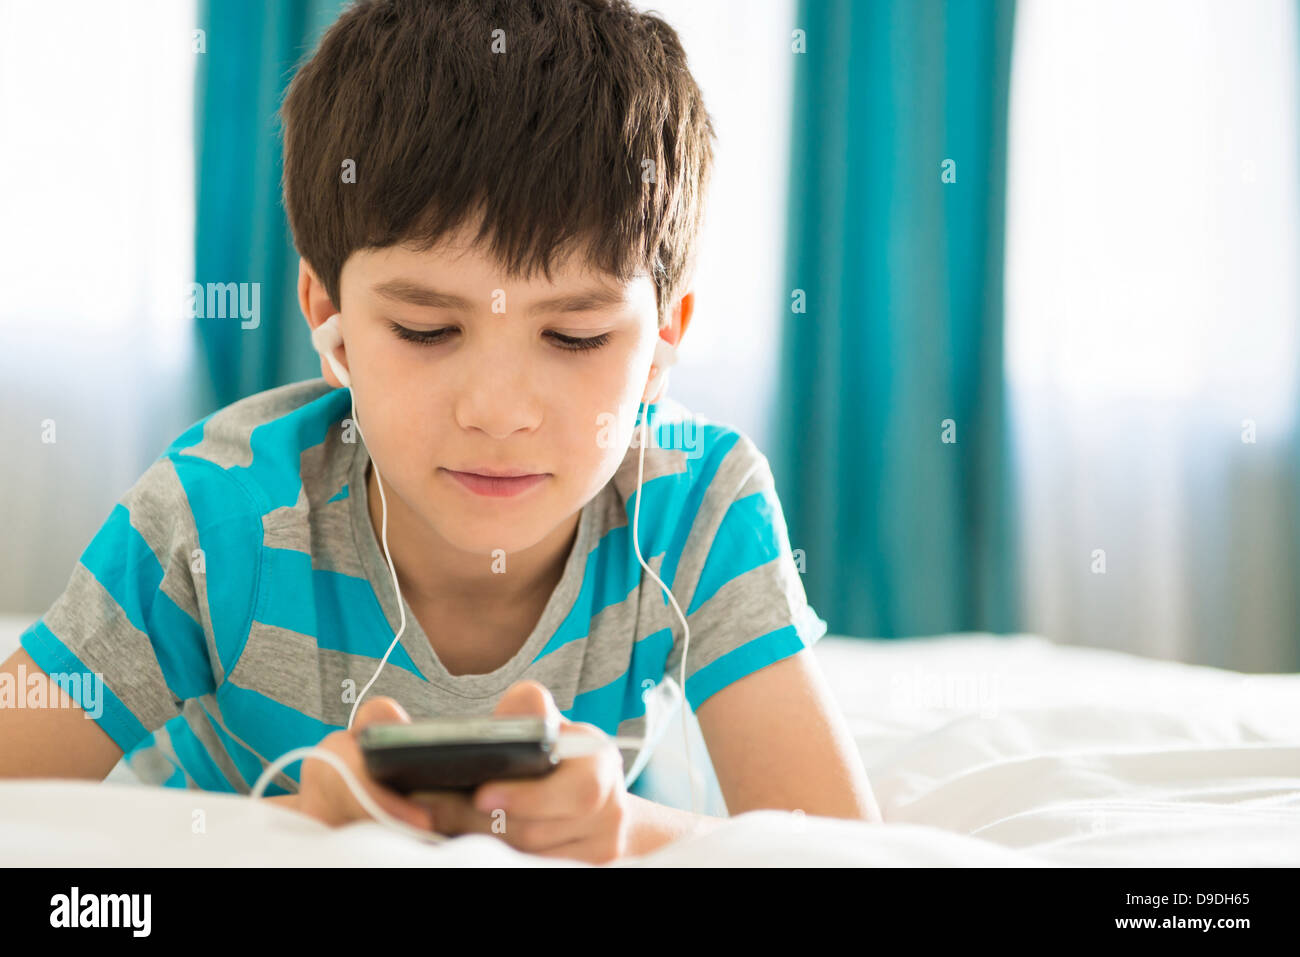 Boy listening to mp3 player on bed Banque D'Images